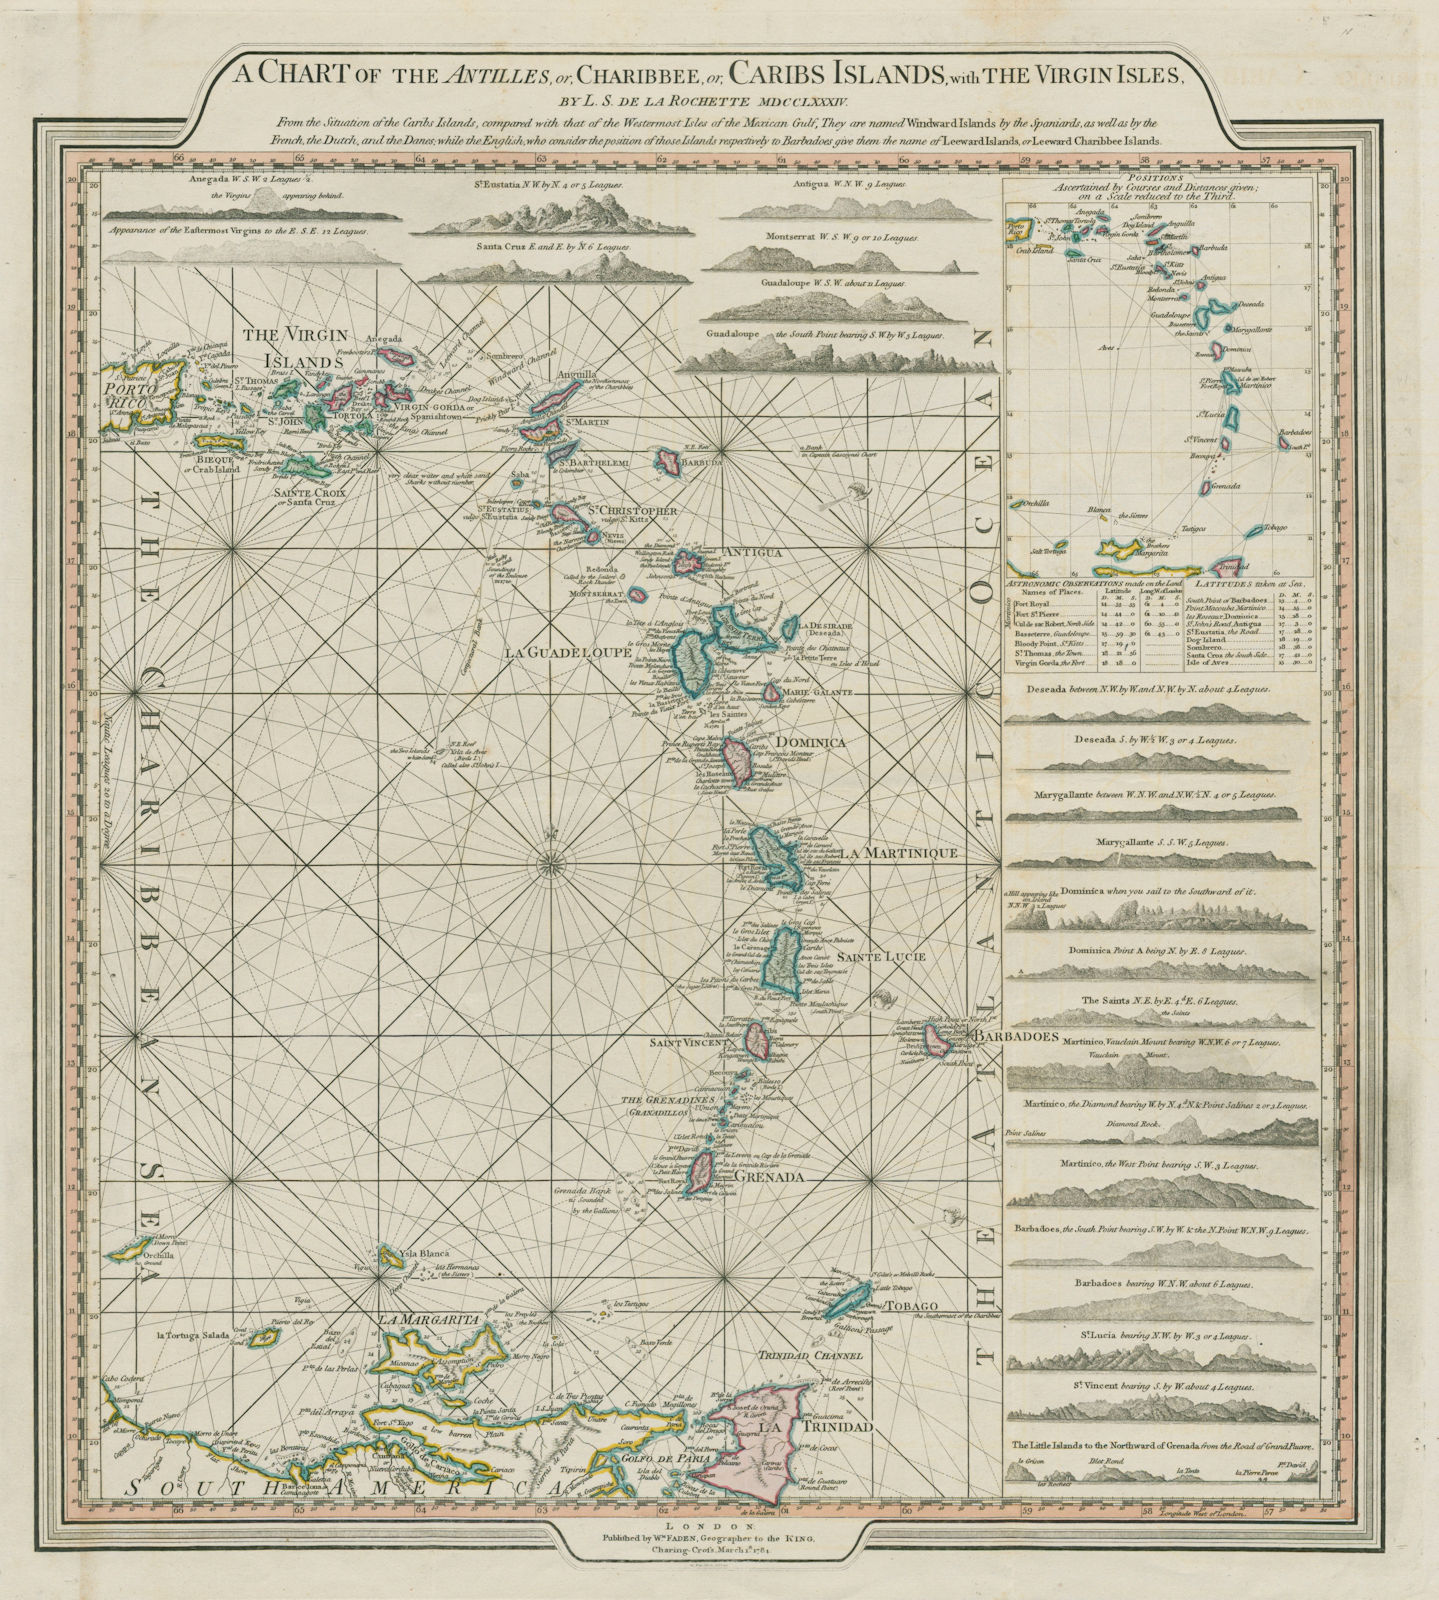 The Antilles or Charibbee or Caribs Islands… DELAROCHETTE / FADEN 1784 old map